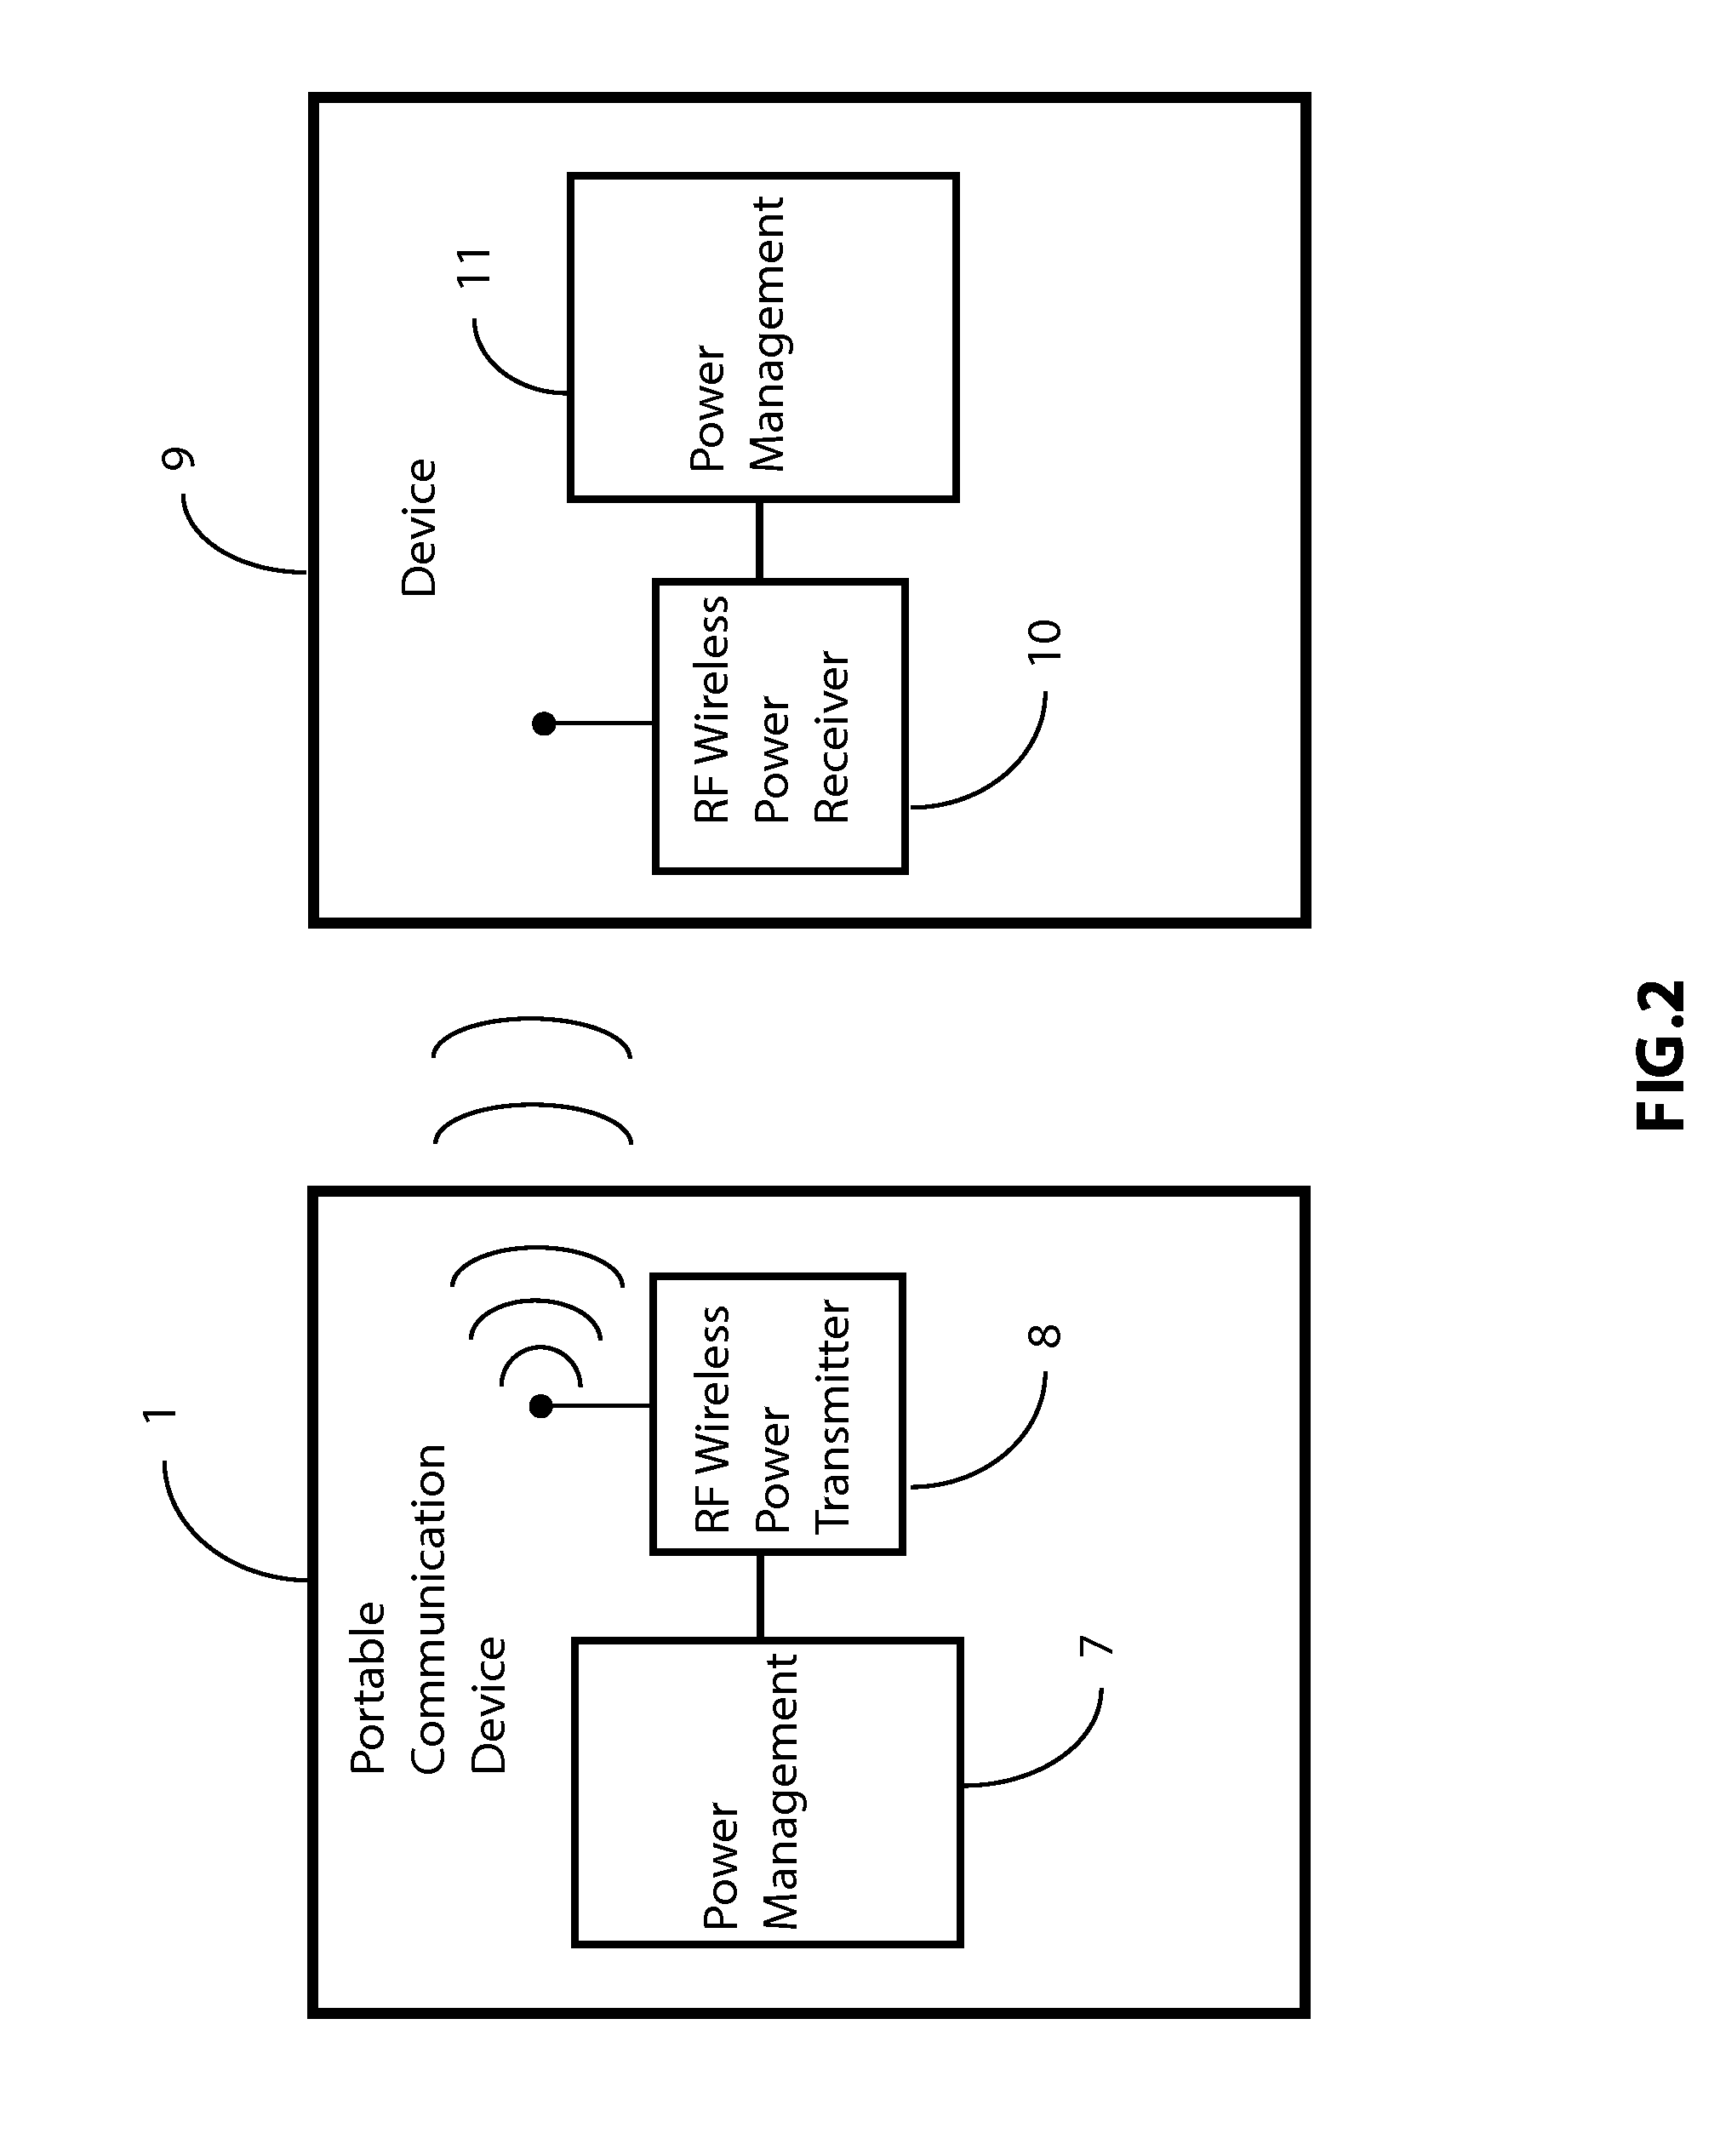 Wireless Power Transmission in Portable Communication Devices